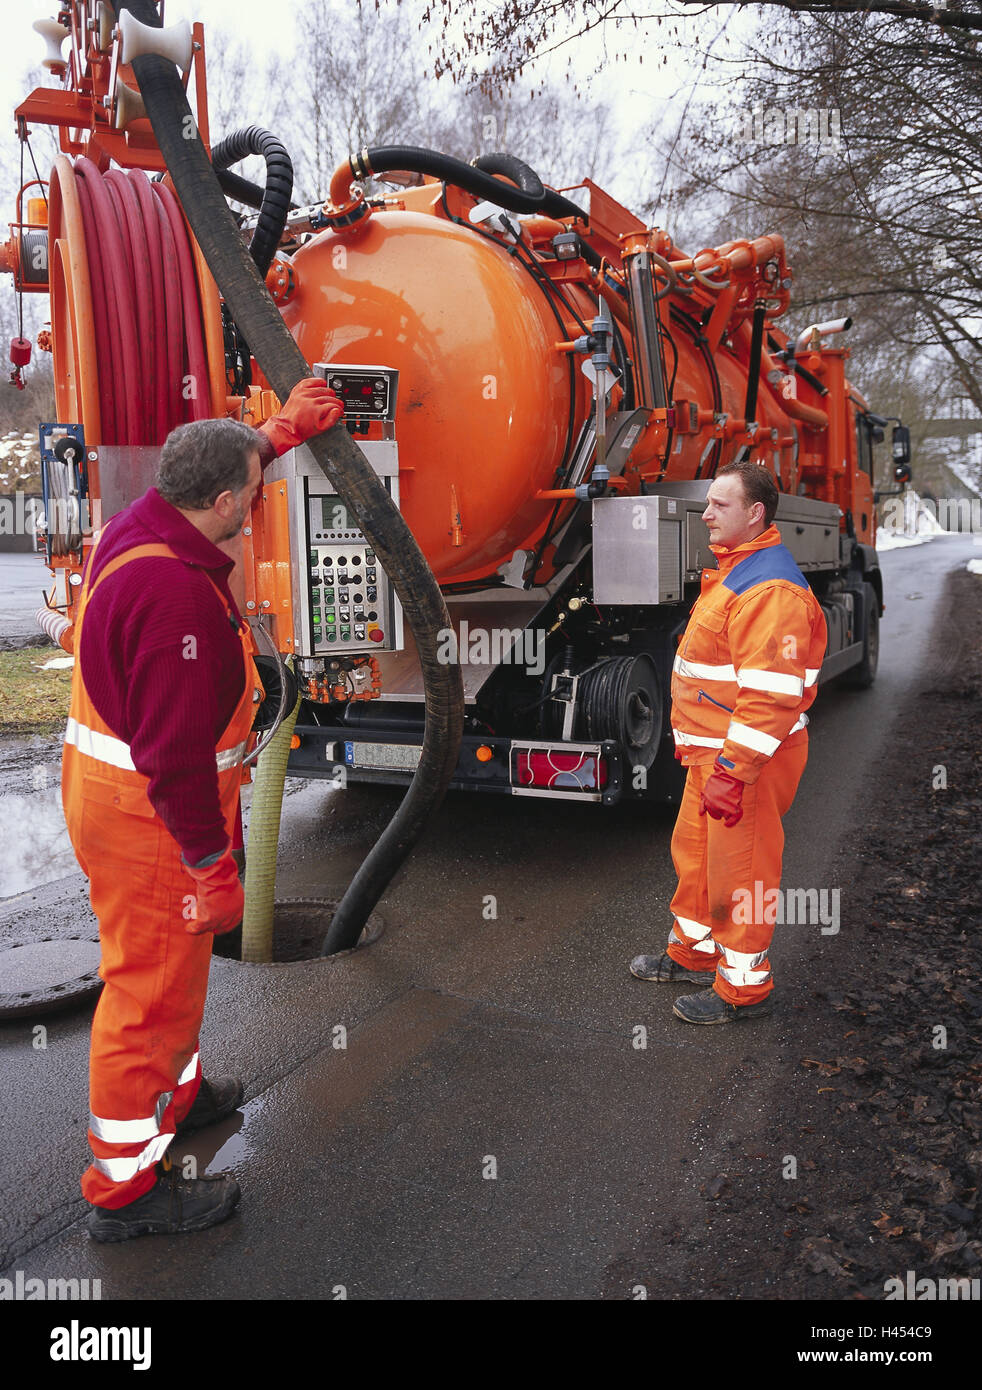 Germany, street, sewage disposal, suction vehicle, men, pump out, channel, disposal company, service, person, employee, two, flush, empty, channel cleaning, Spülfahrzeug, disposal vehicle, sewage technology, sewage disposal, pump out, liquid disposal, occupation, work, rinse cesspool, sewage mine, feces, liquid, sewage, disposal, removal, cleanness, vehicle, truck, special vehicle, commercial vehicle, collective vehicle, security clothes, protective clothing, warning protective clothing, luminous colours, orange, reflect, Stock Photo